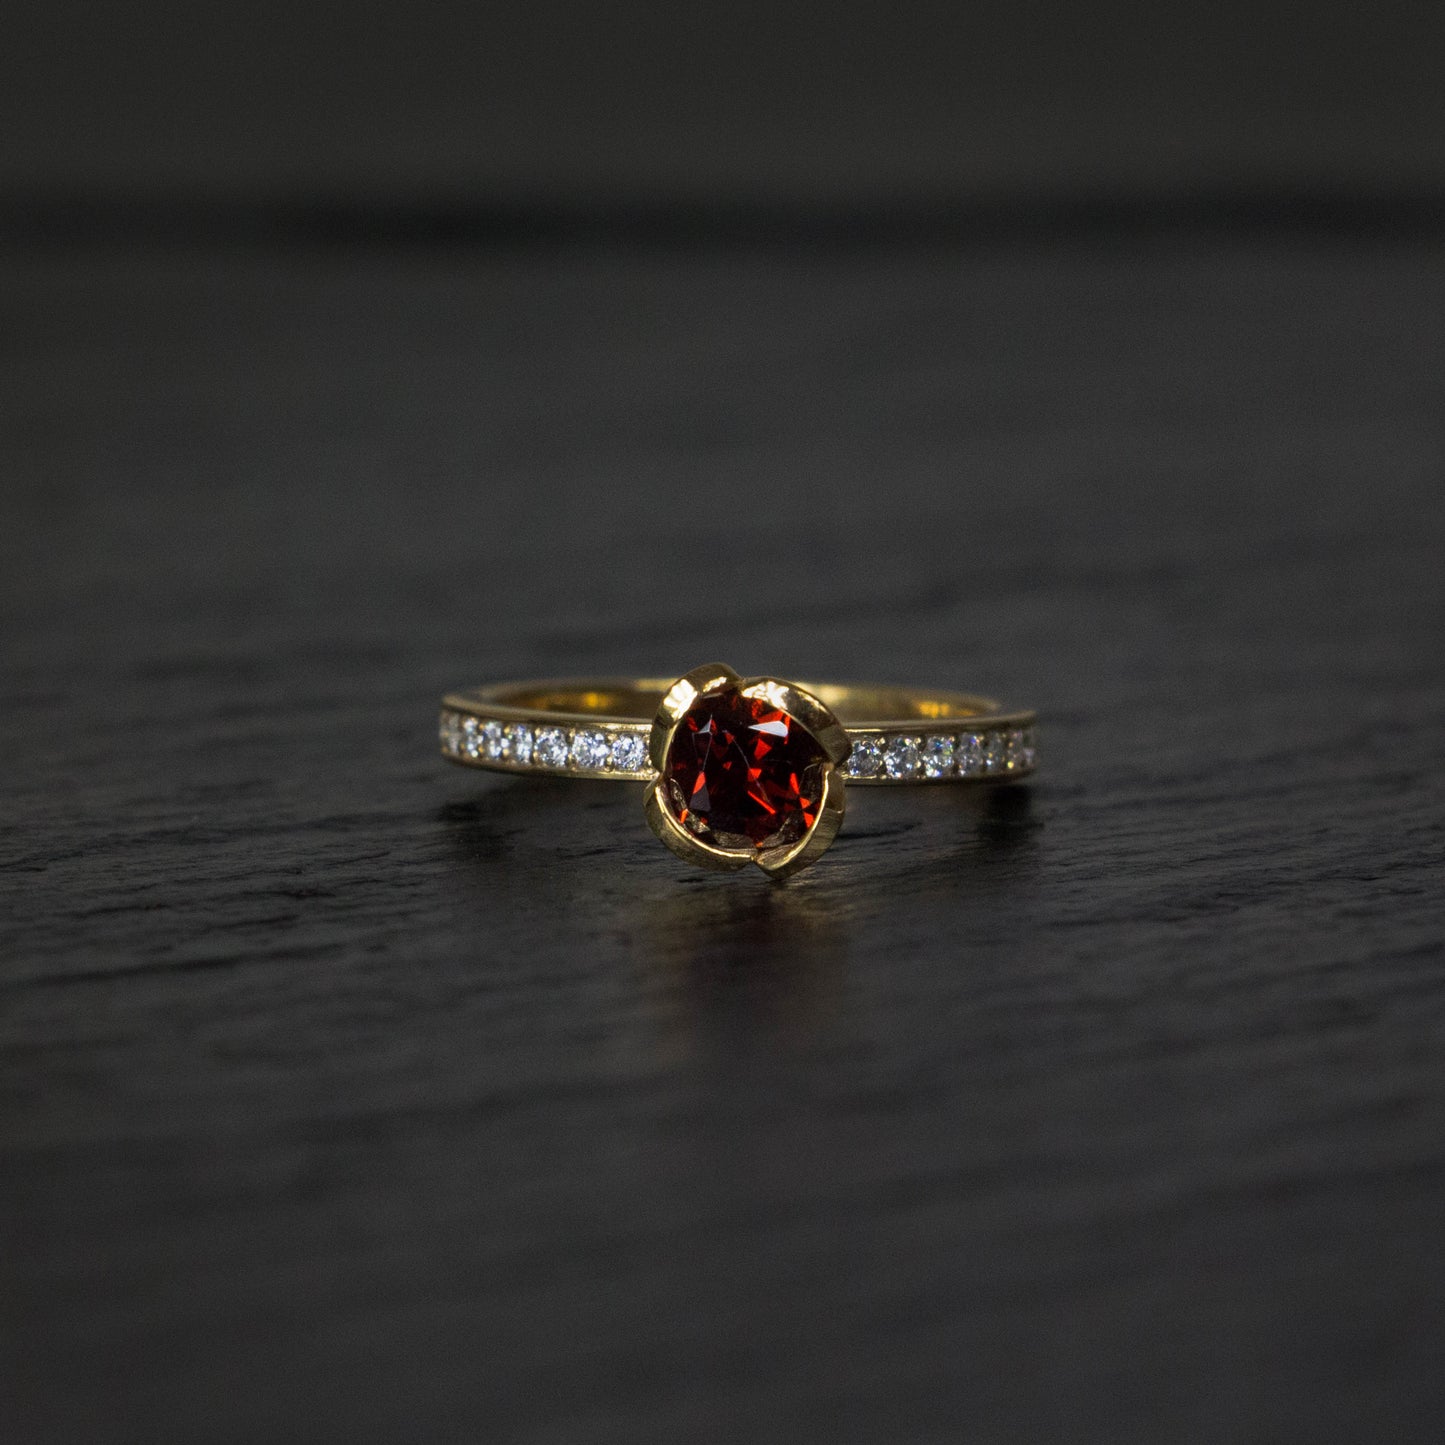 Alternative engagement ring in garnet and yellow gold